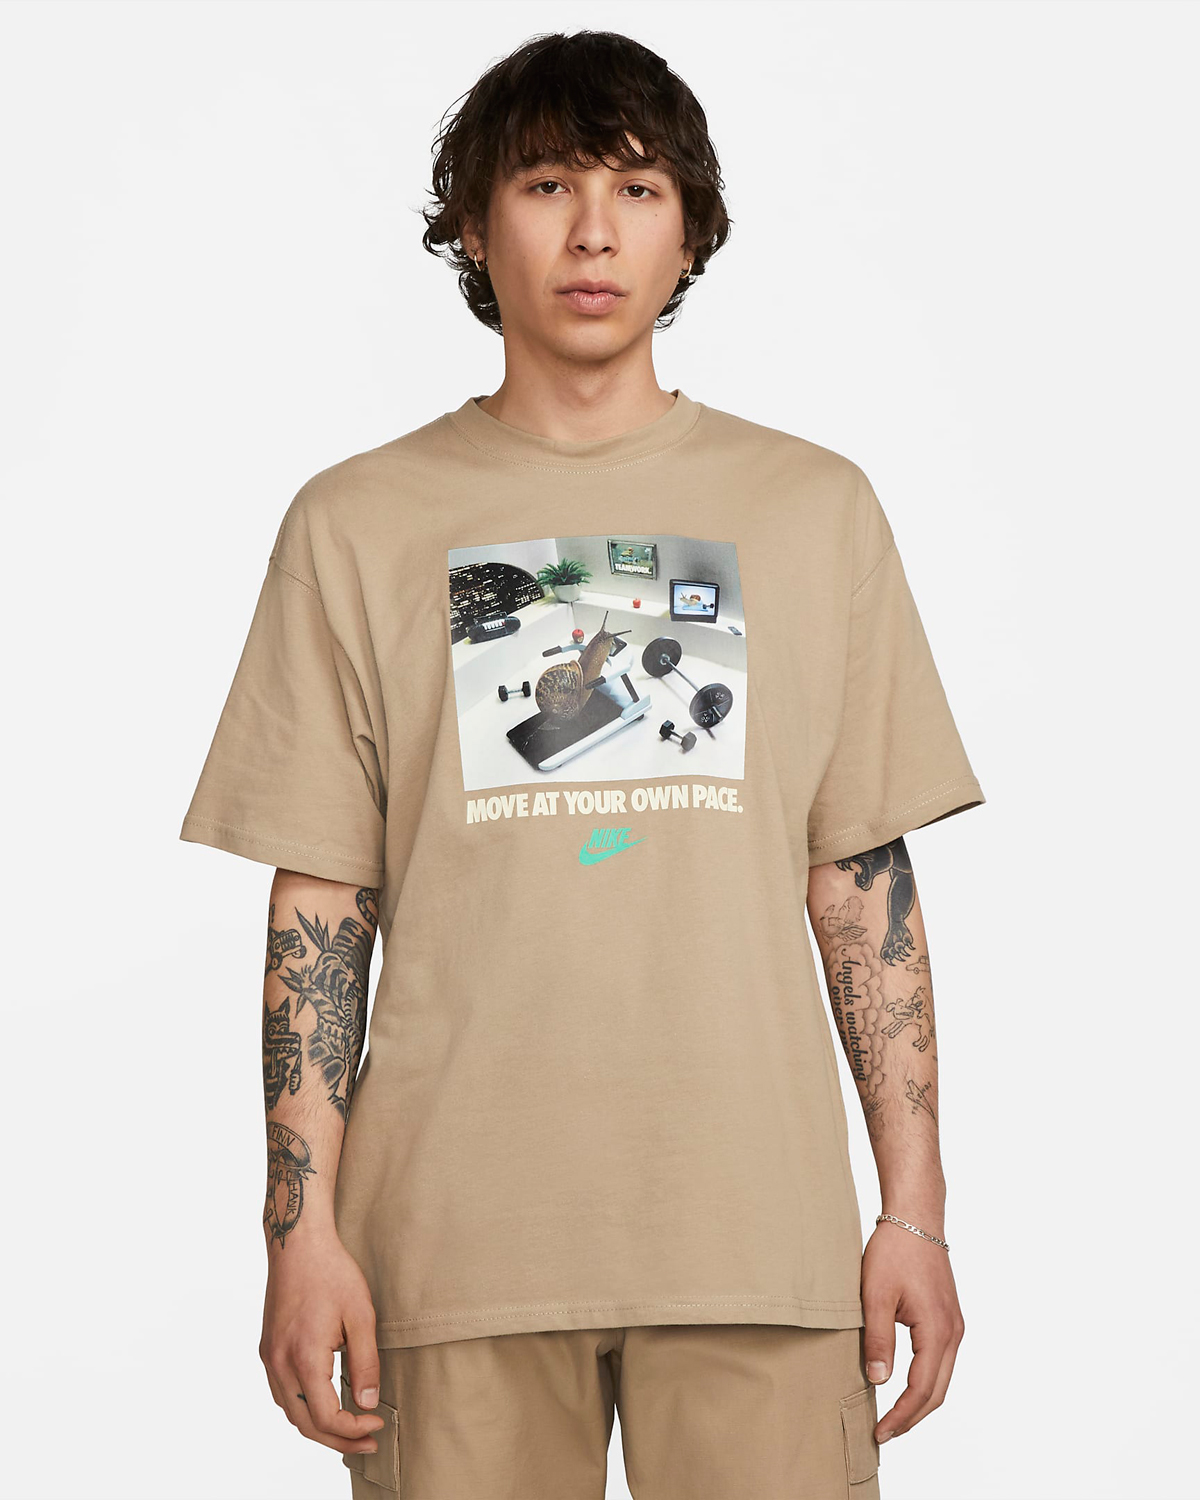 Nike-Sportswear-Max90-Move-At-Your-Own-Pace-T-Shirt-Khaki